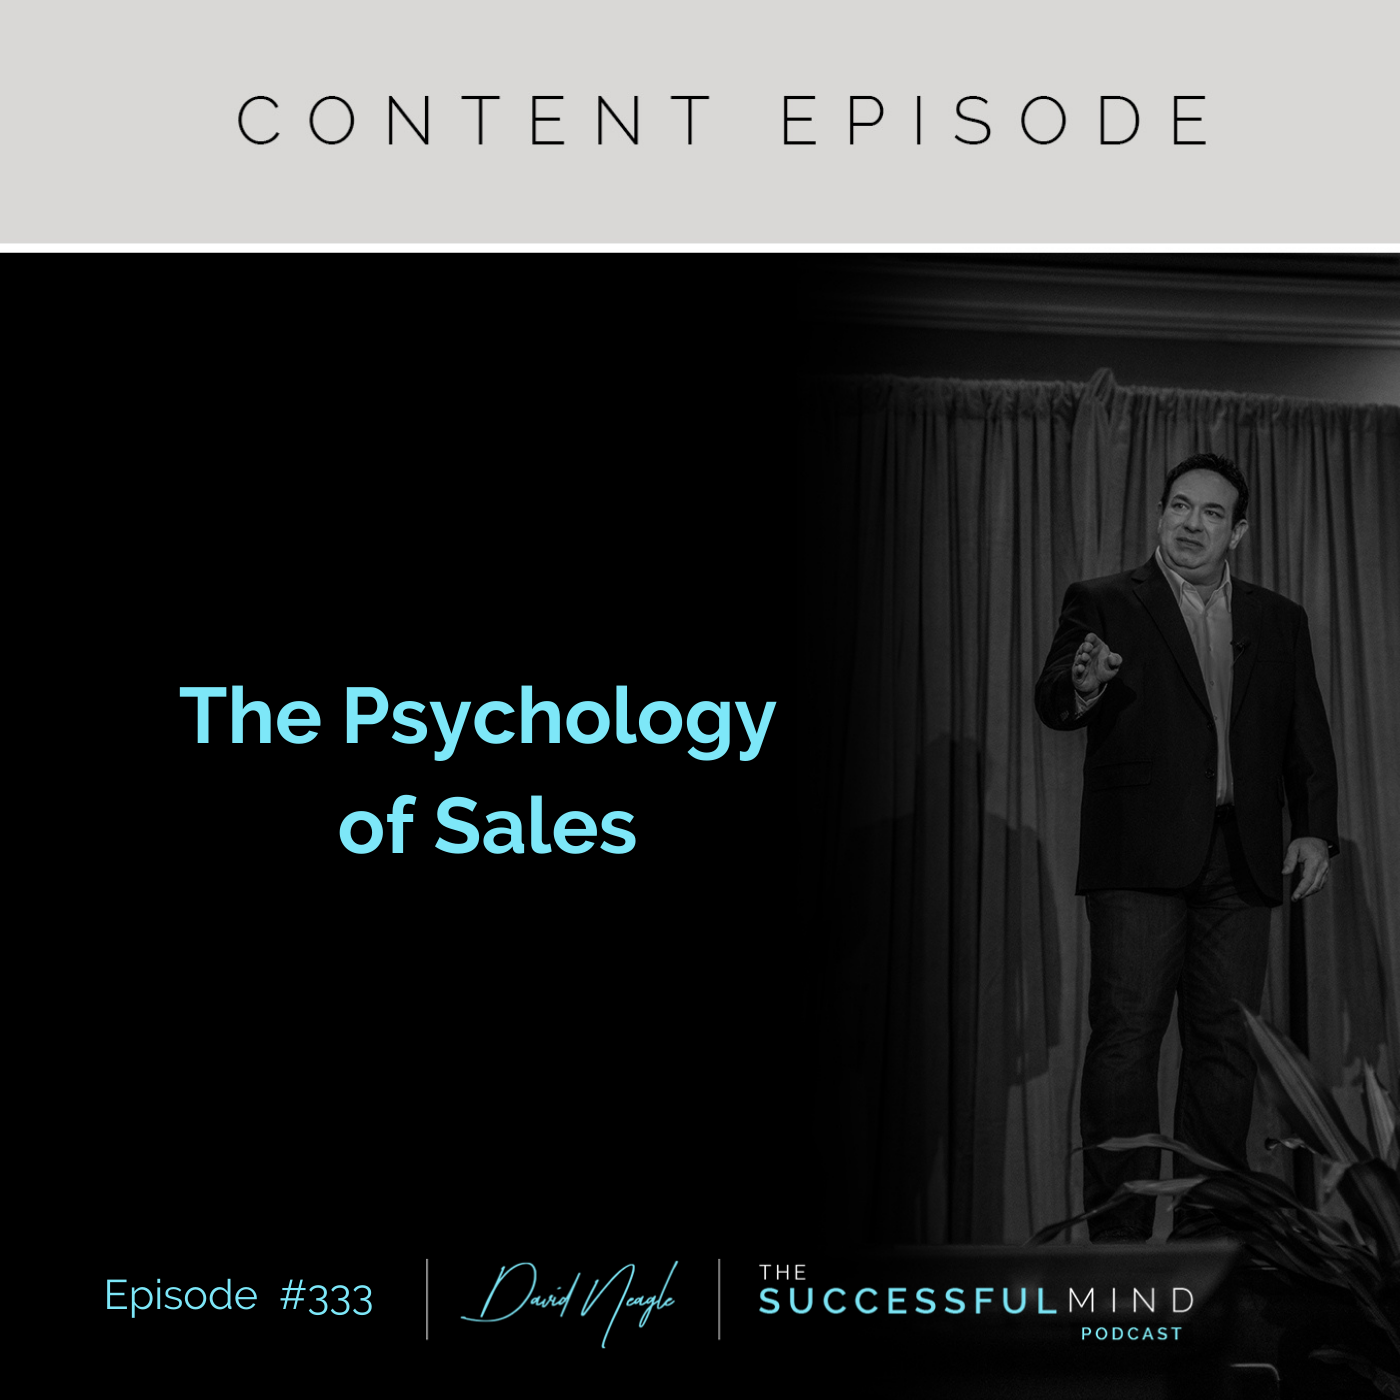 The Successful Mind Podcast - Episode 333 - The Psychology of Sales